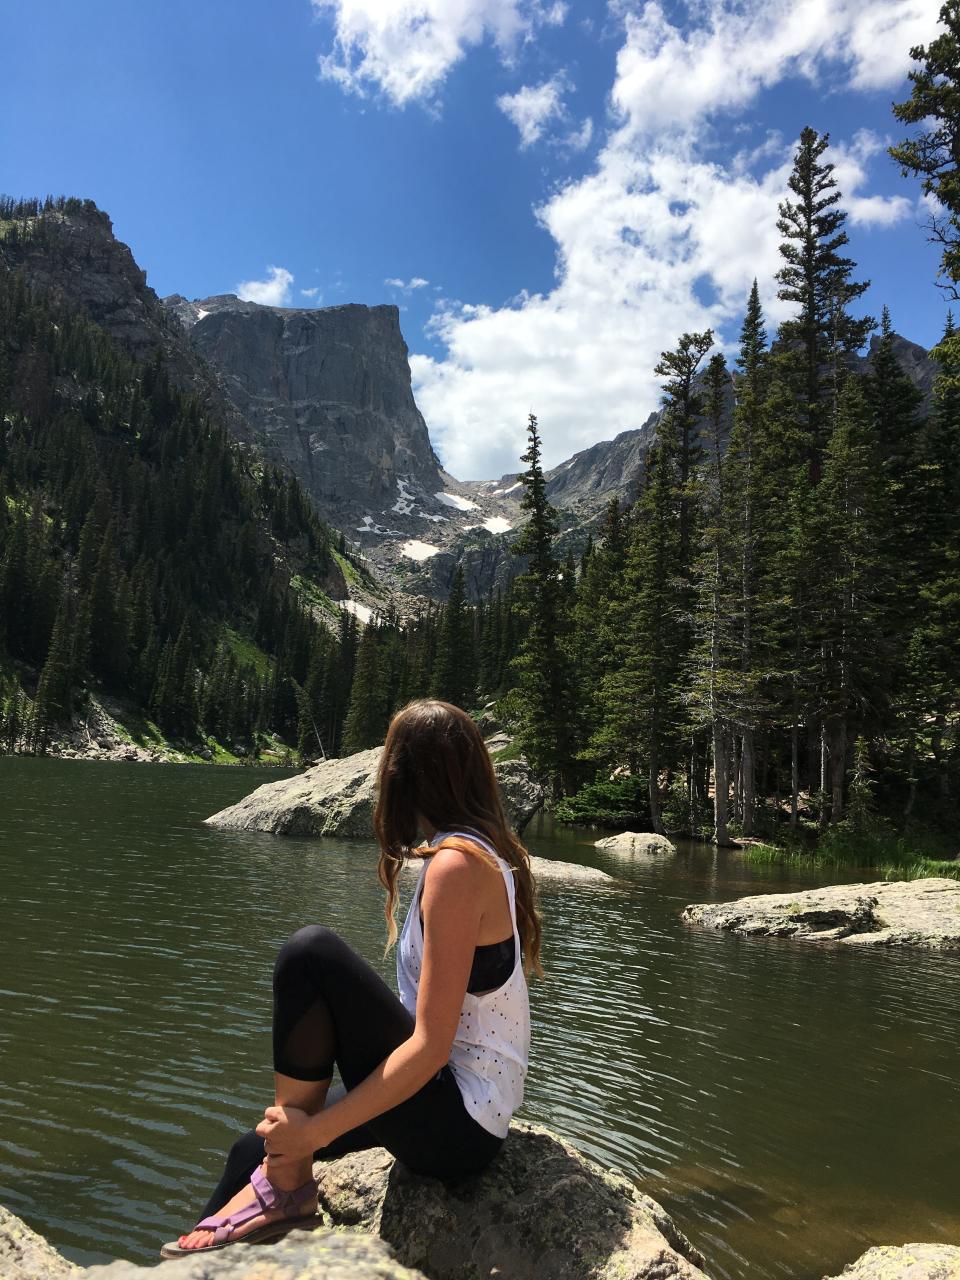 Emily, wearing purple sandals, black leggings, and a black and white tank top, sitting on a rock and staring out at the mountains and trees on a lake. 